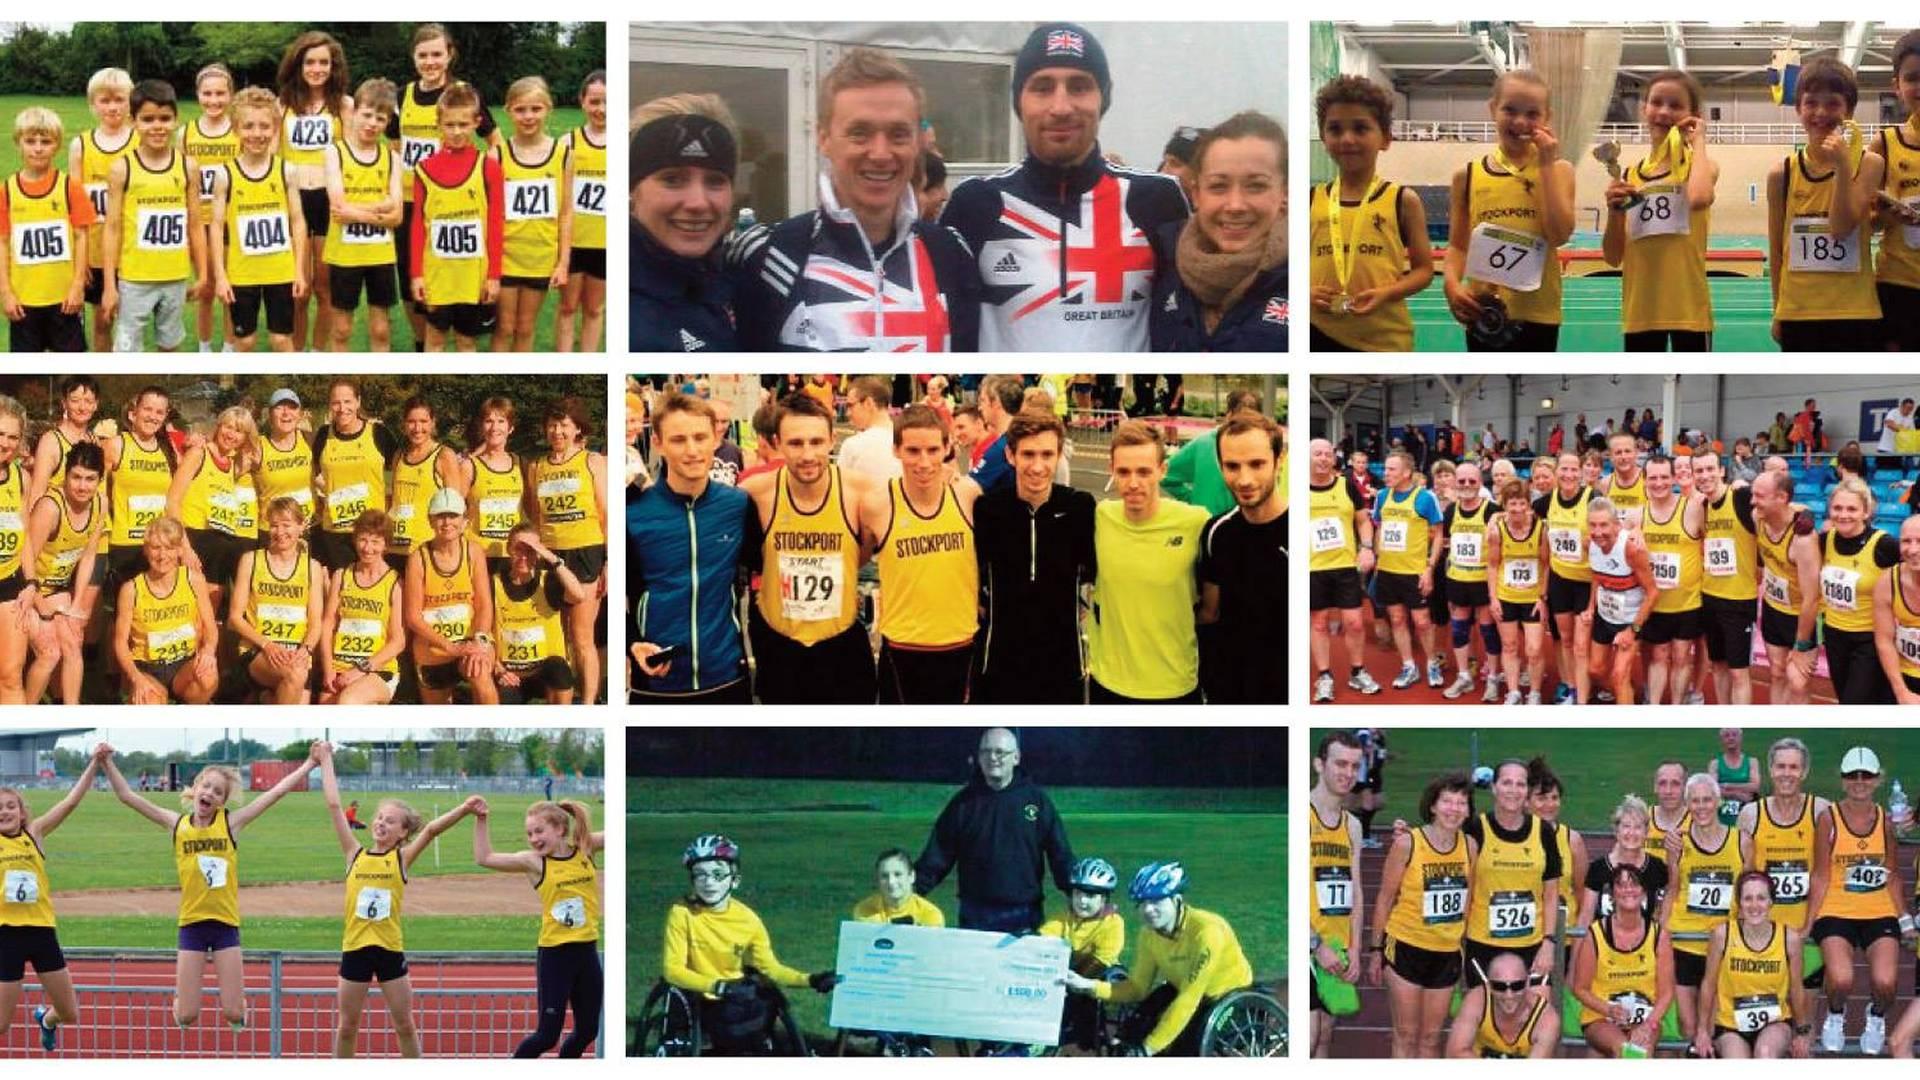 Stockport Harriers photo